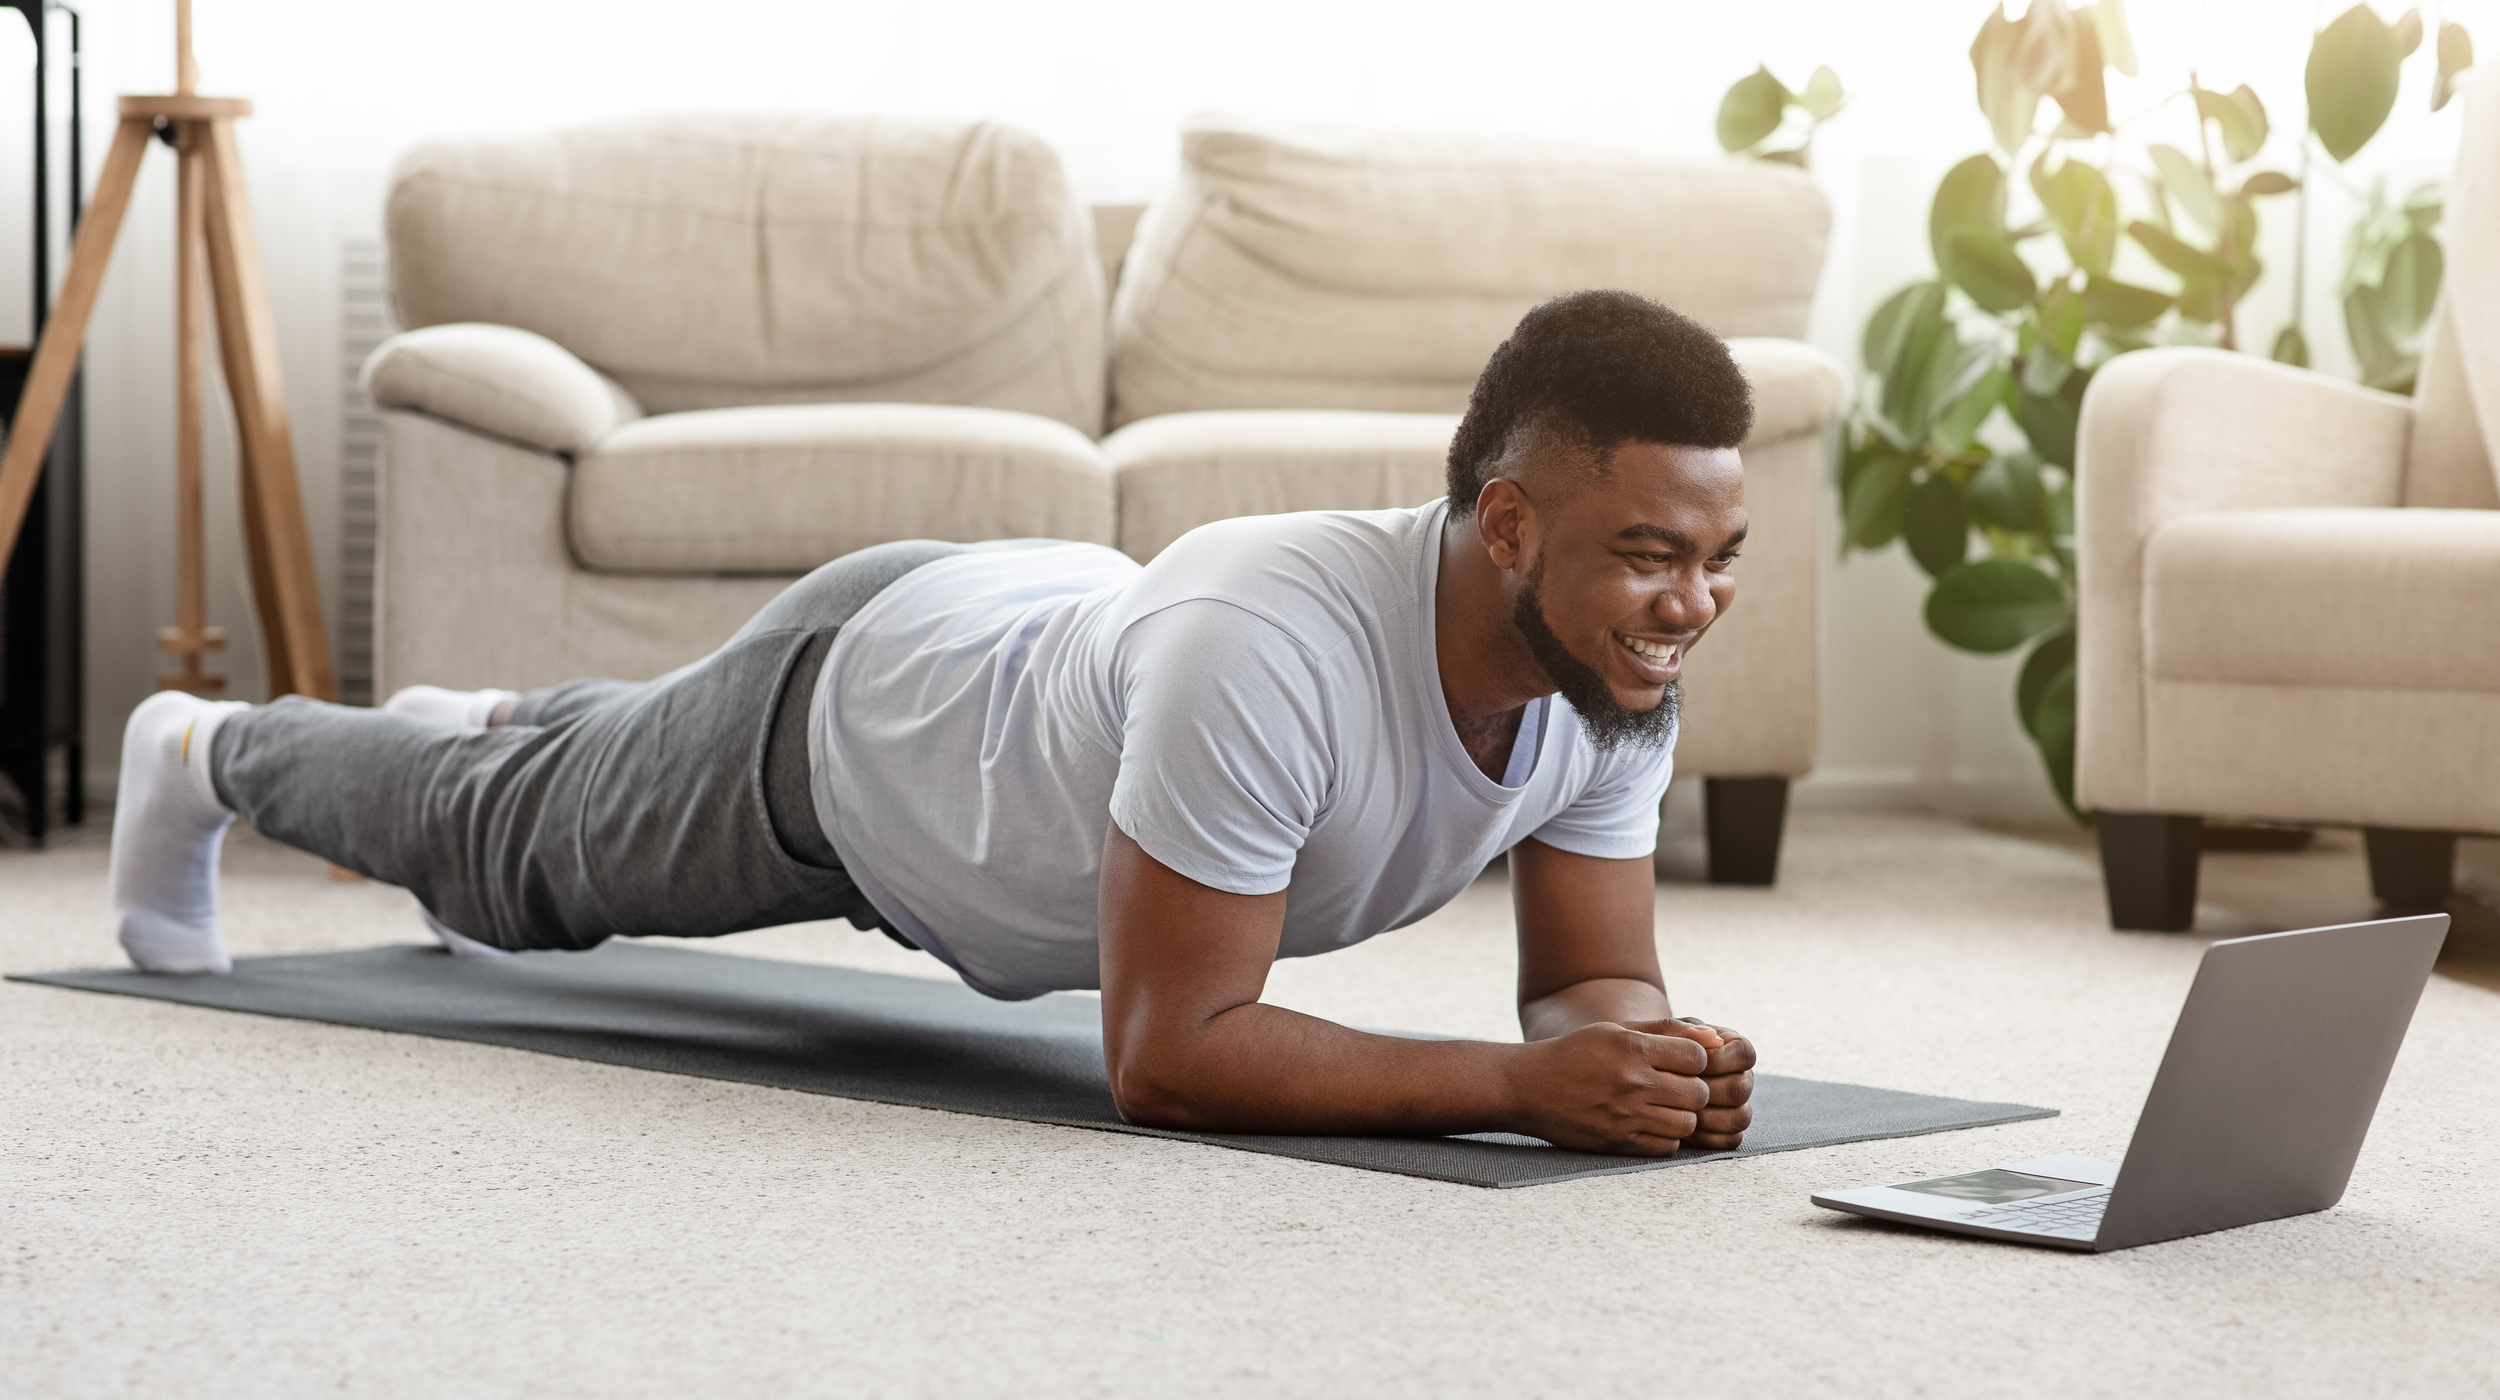 The Growth of Online Personal Training – is it the Future?